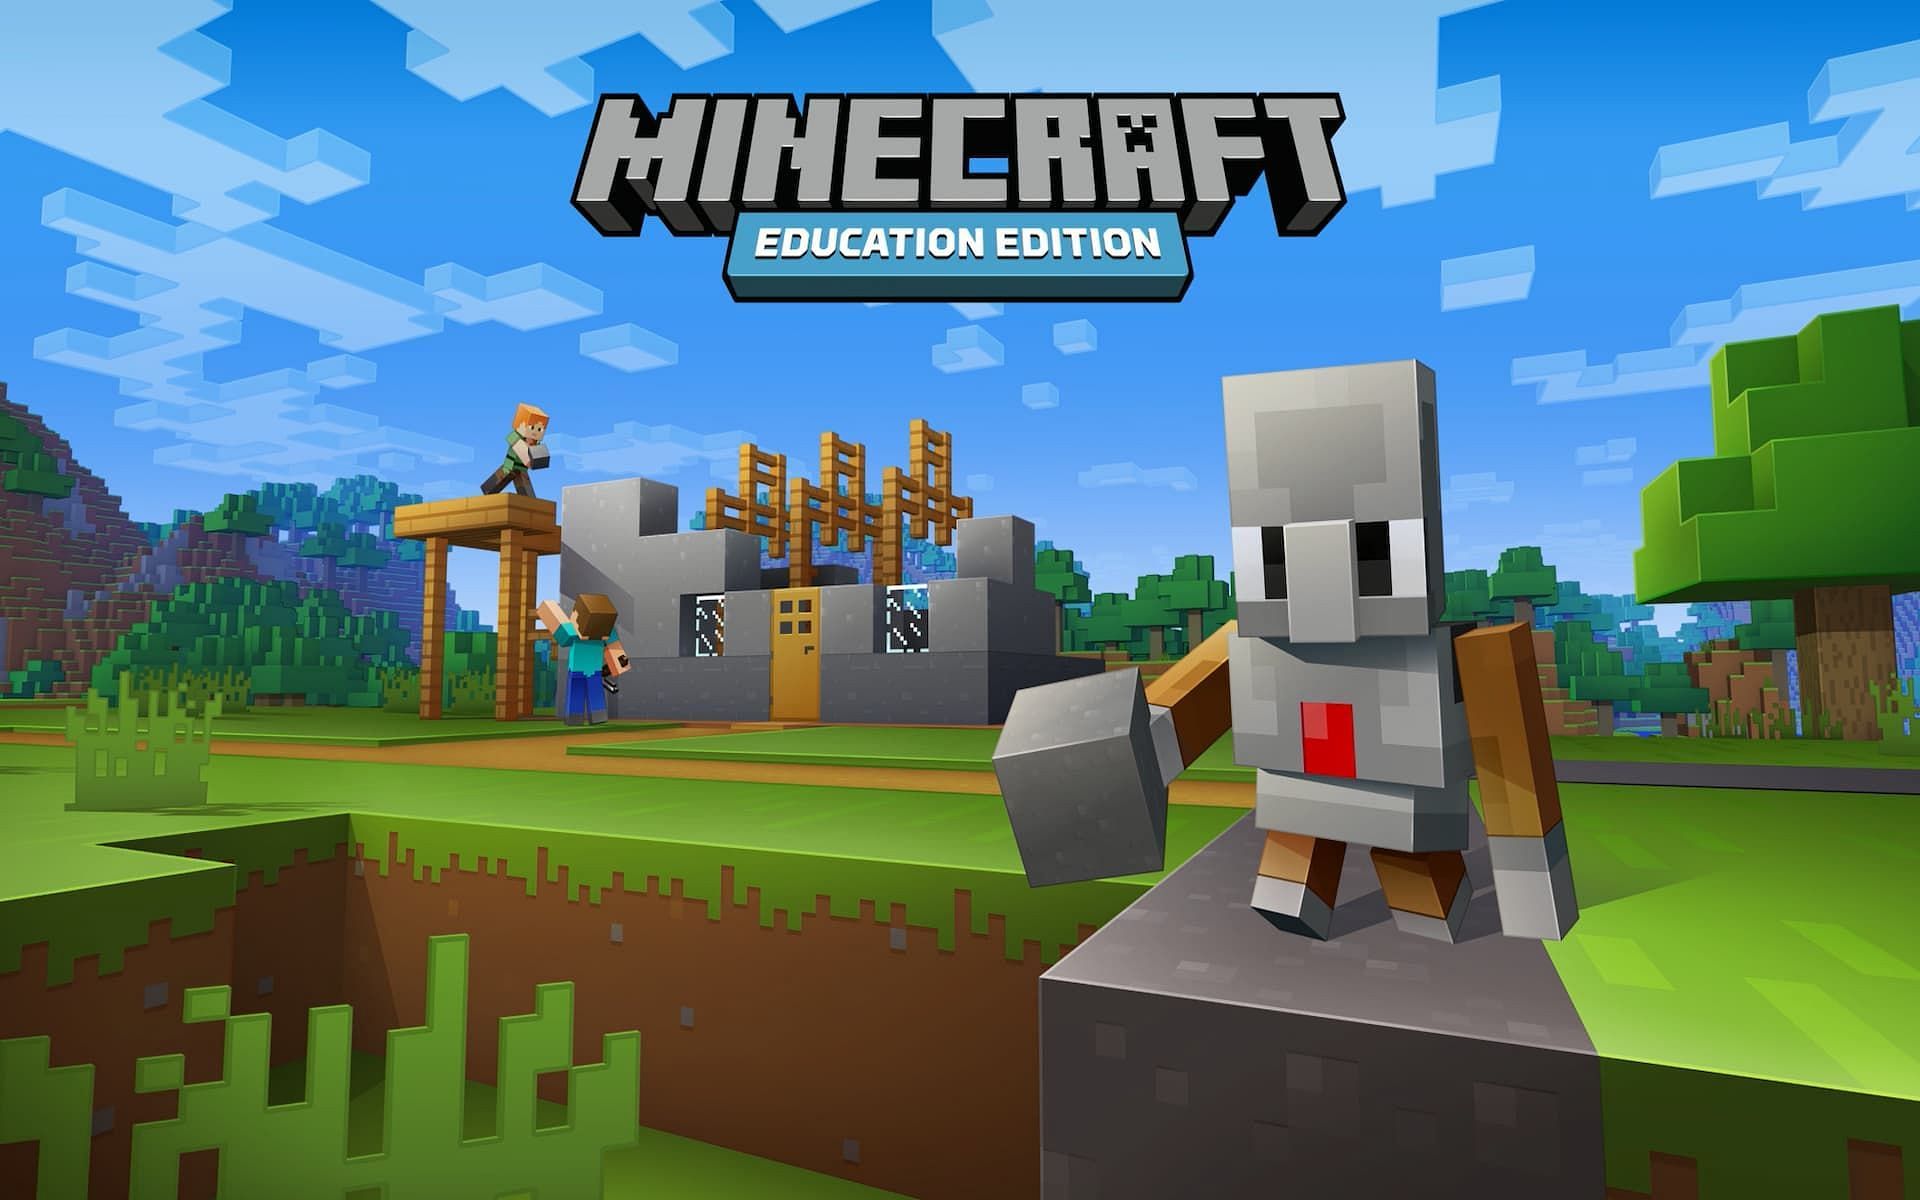 Learning can be fun with Minecraft Education Edition (Image via Mojang)